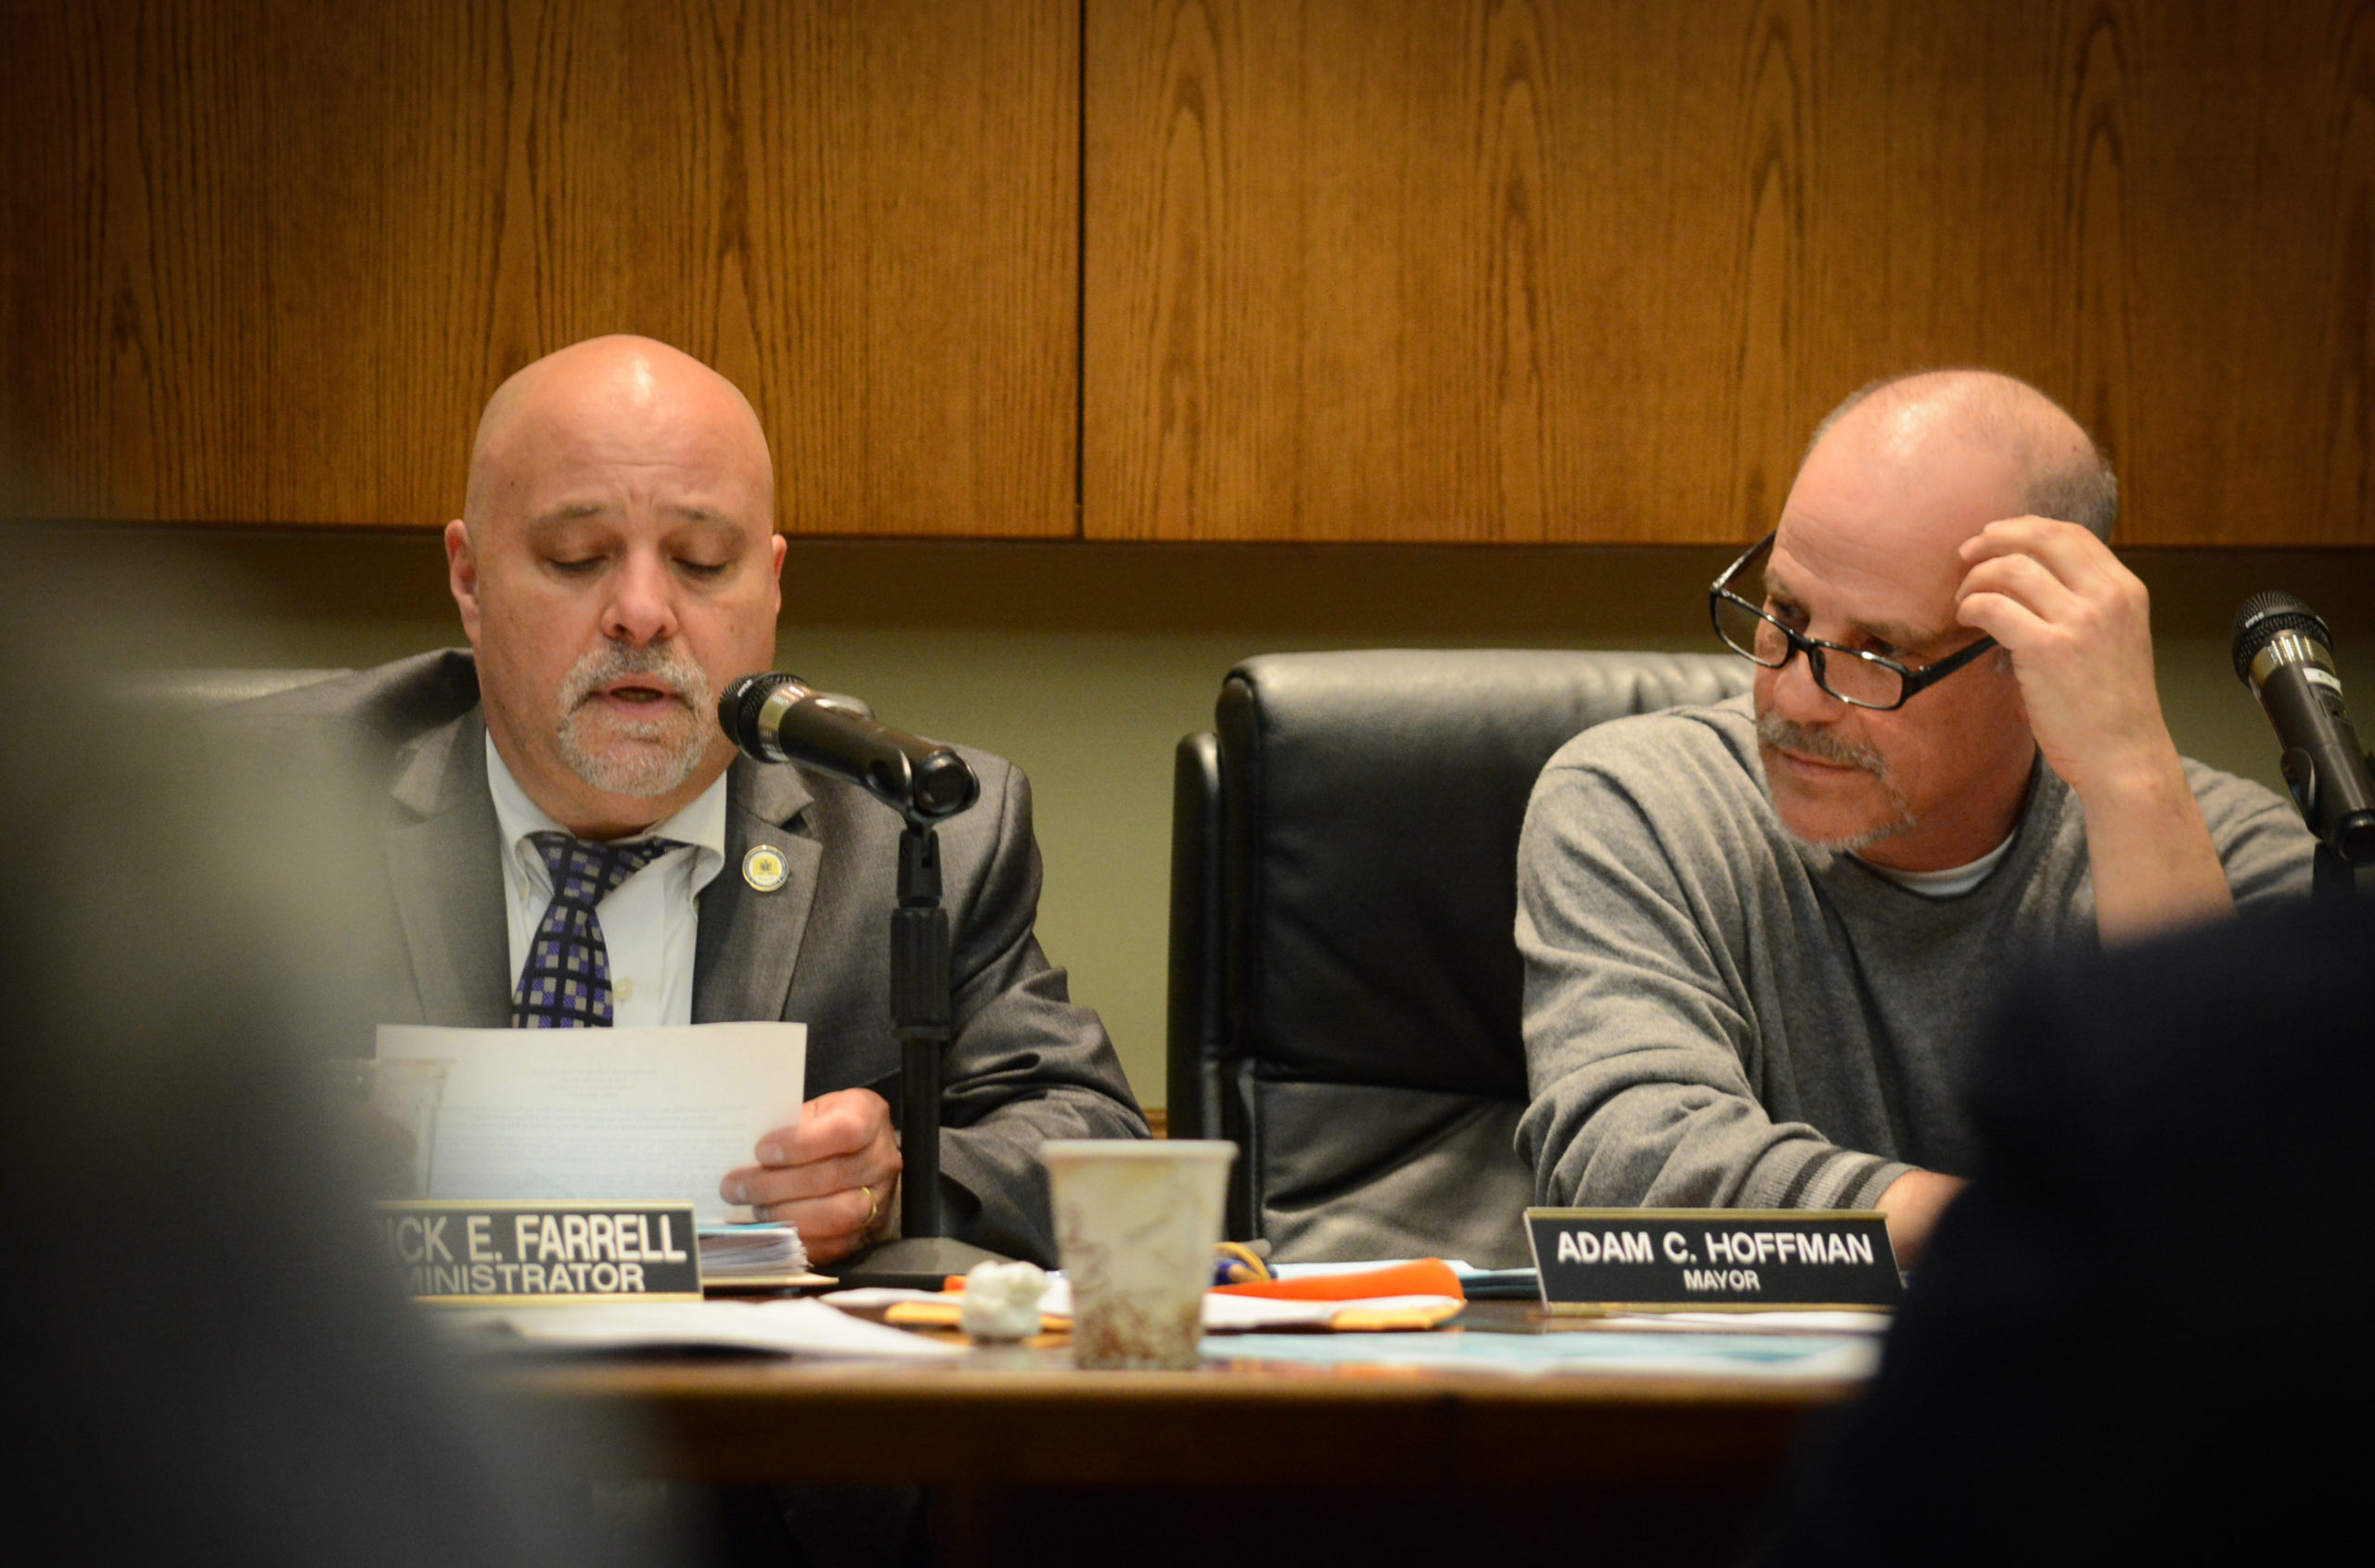 Lake Success Village Mayor Adam Hoffman looks on as Village Administrator Pat Farrell reads a resolution regarding ExteNet Systems. (Photo by Janelle Clausen)